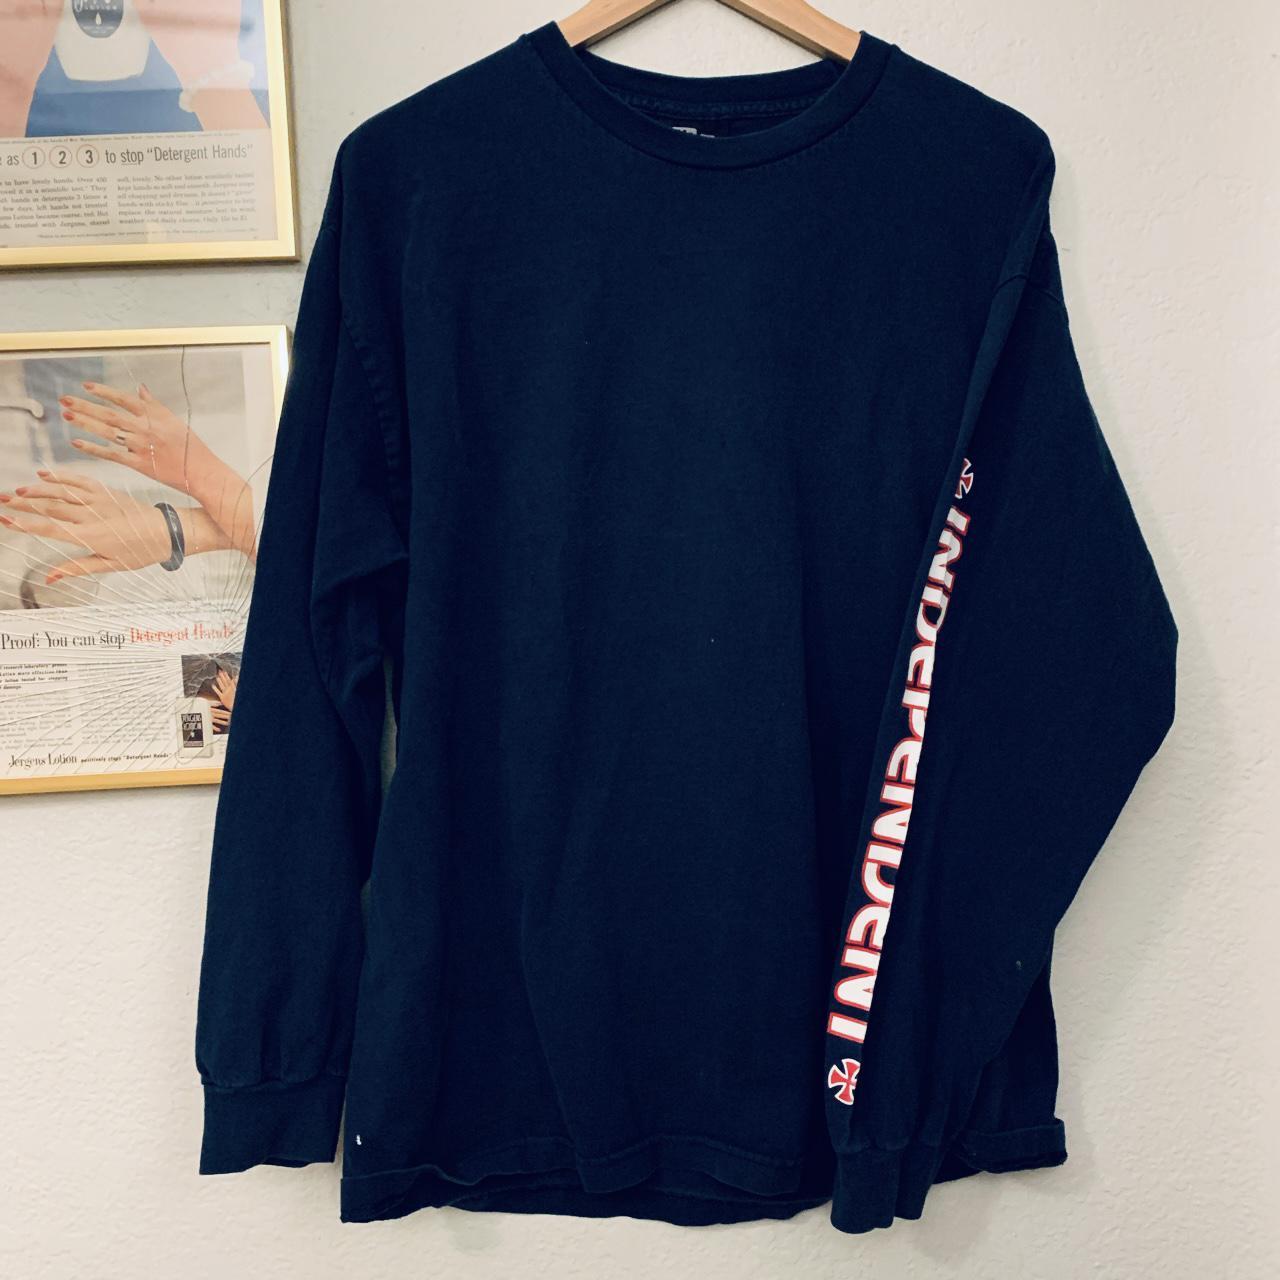 Product Image 2 - Independent long sleeve tee. Navy